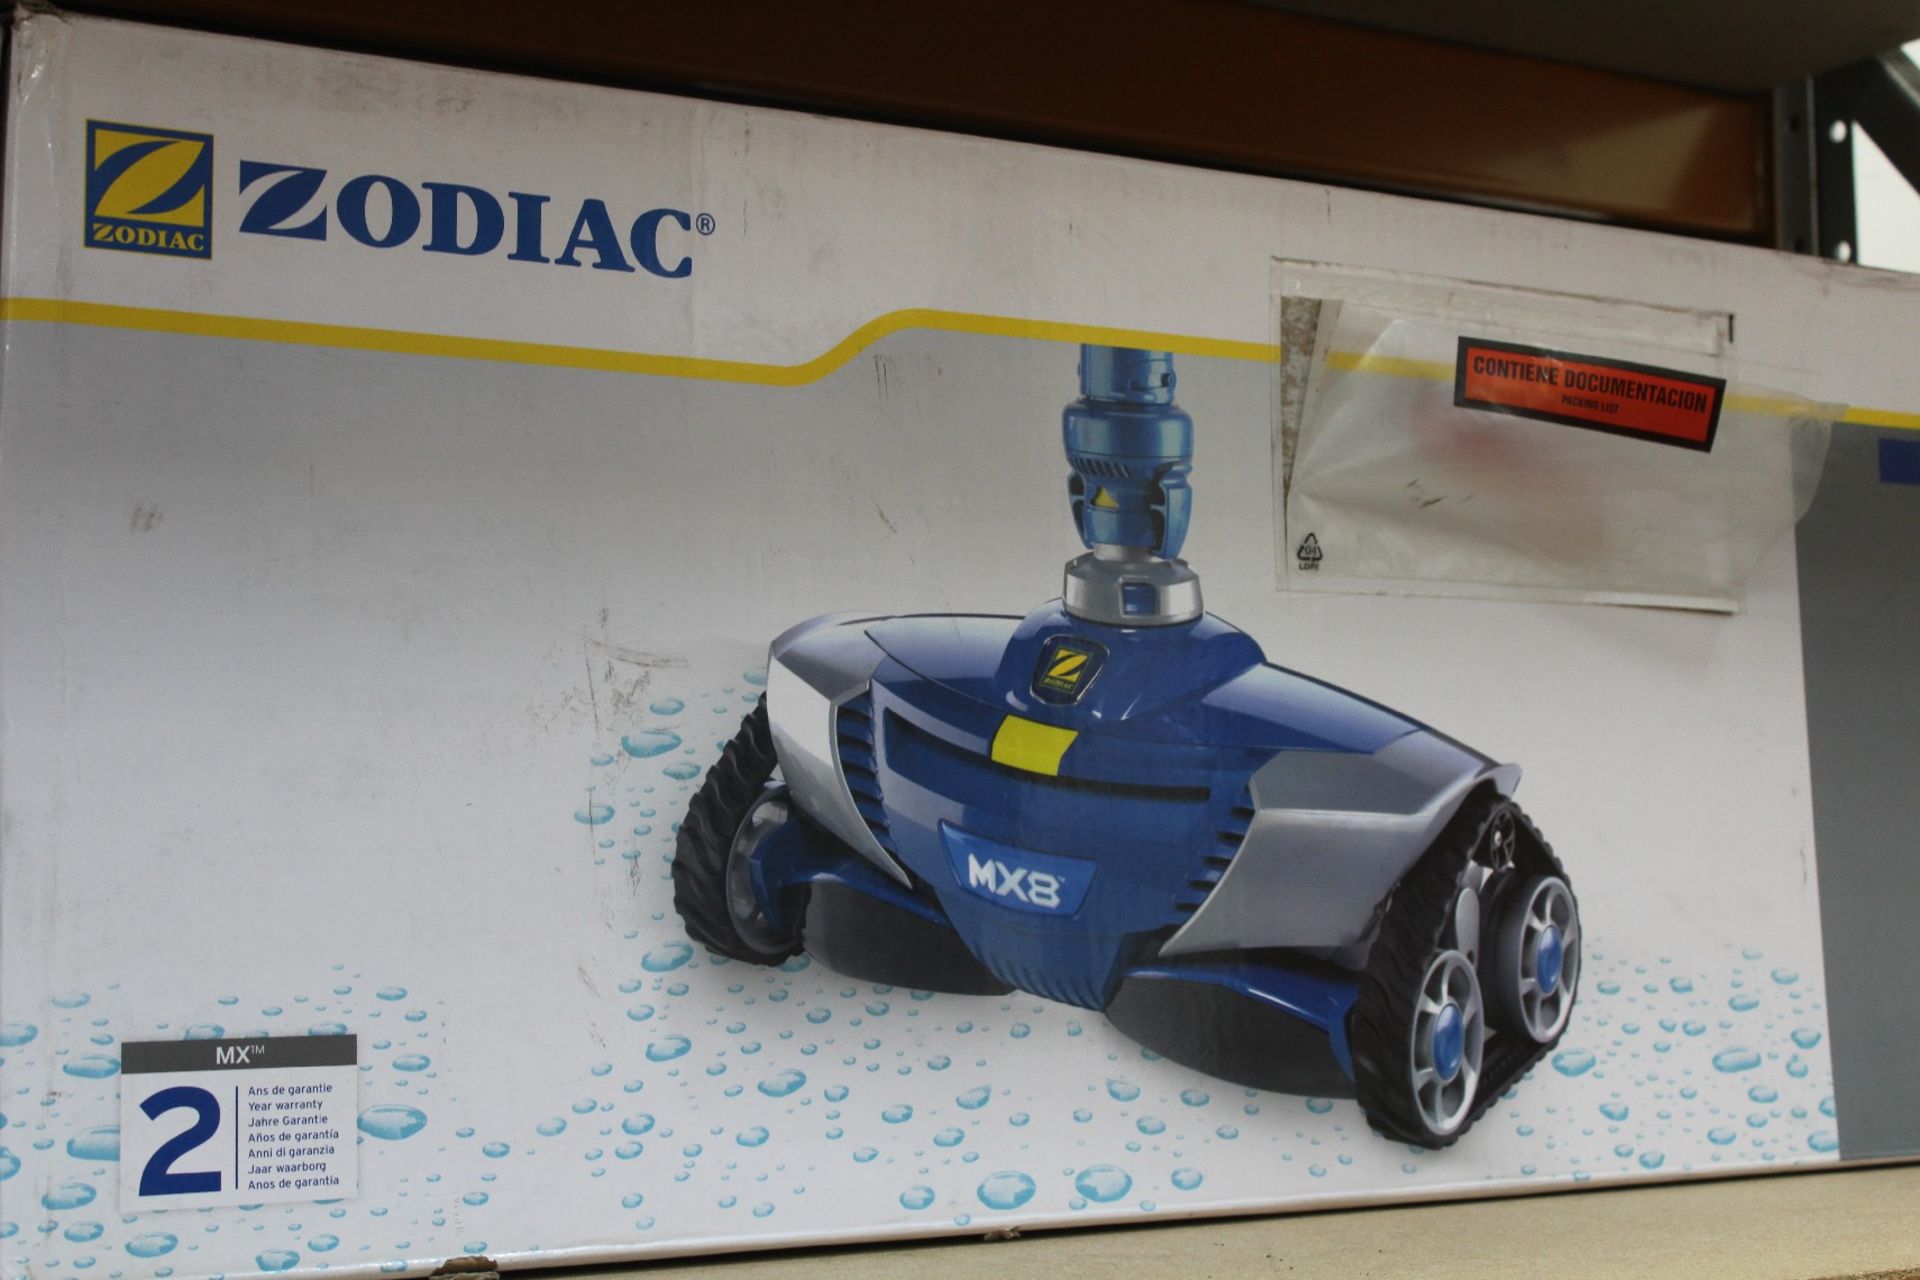 A Zodiac MX8 Suction Pool Cleaner.